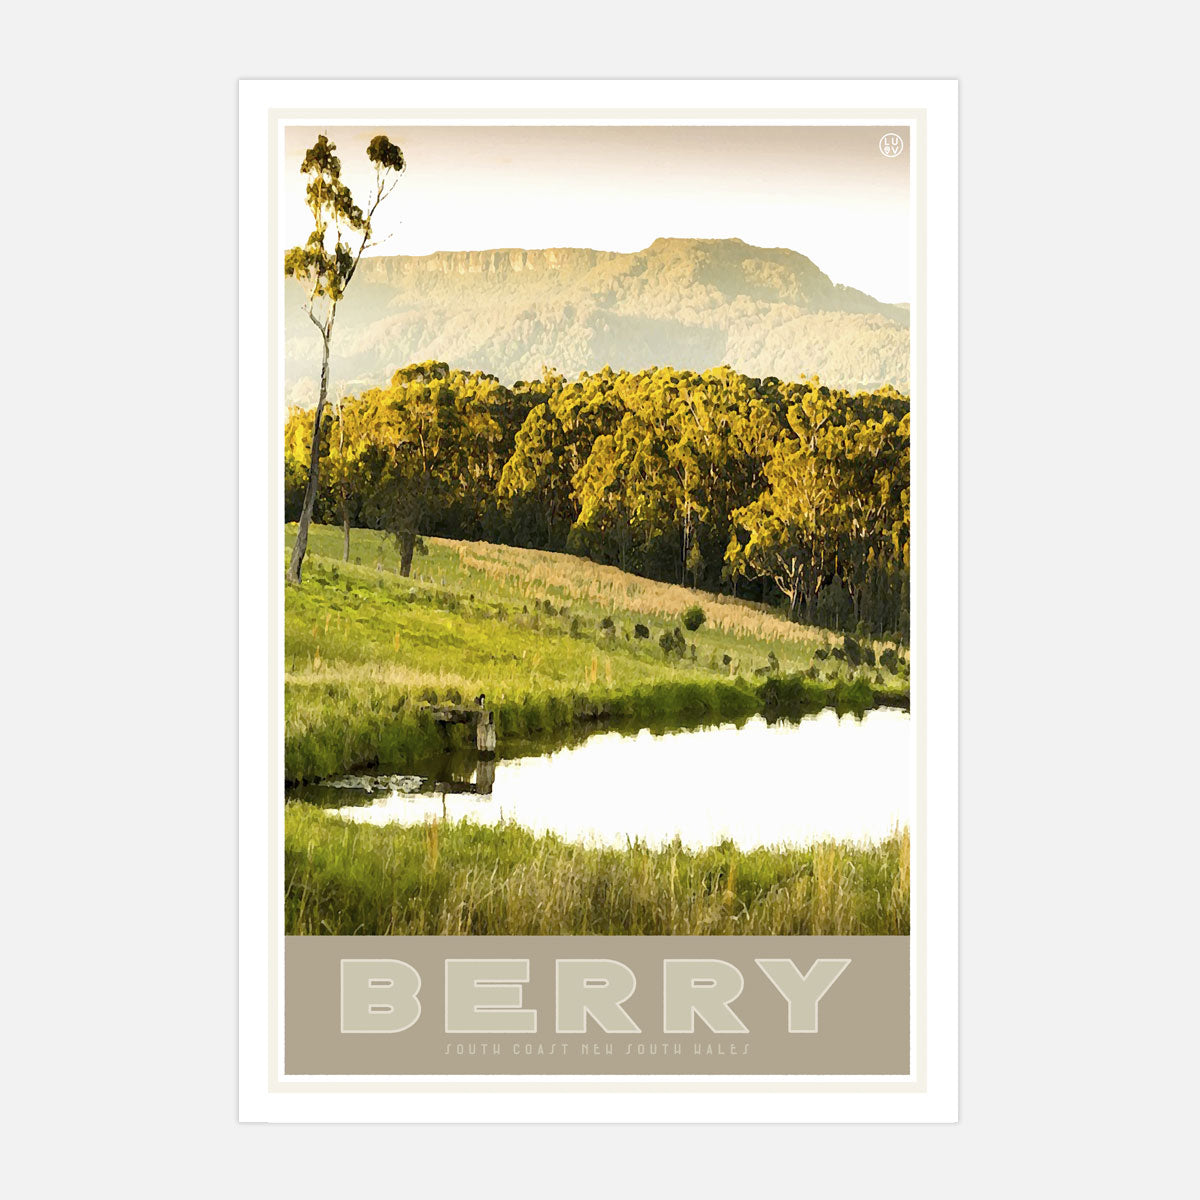 Berry vintage travel style poster by Places We Luv